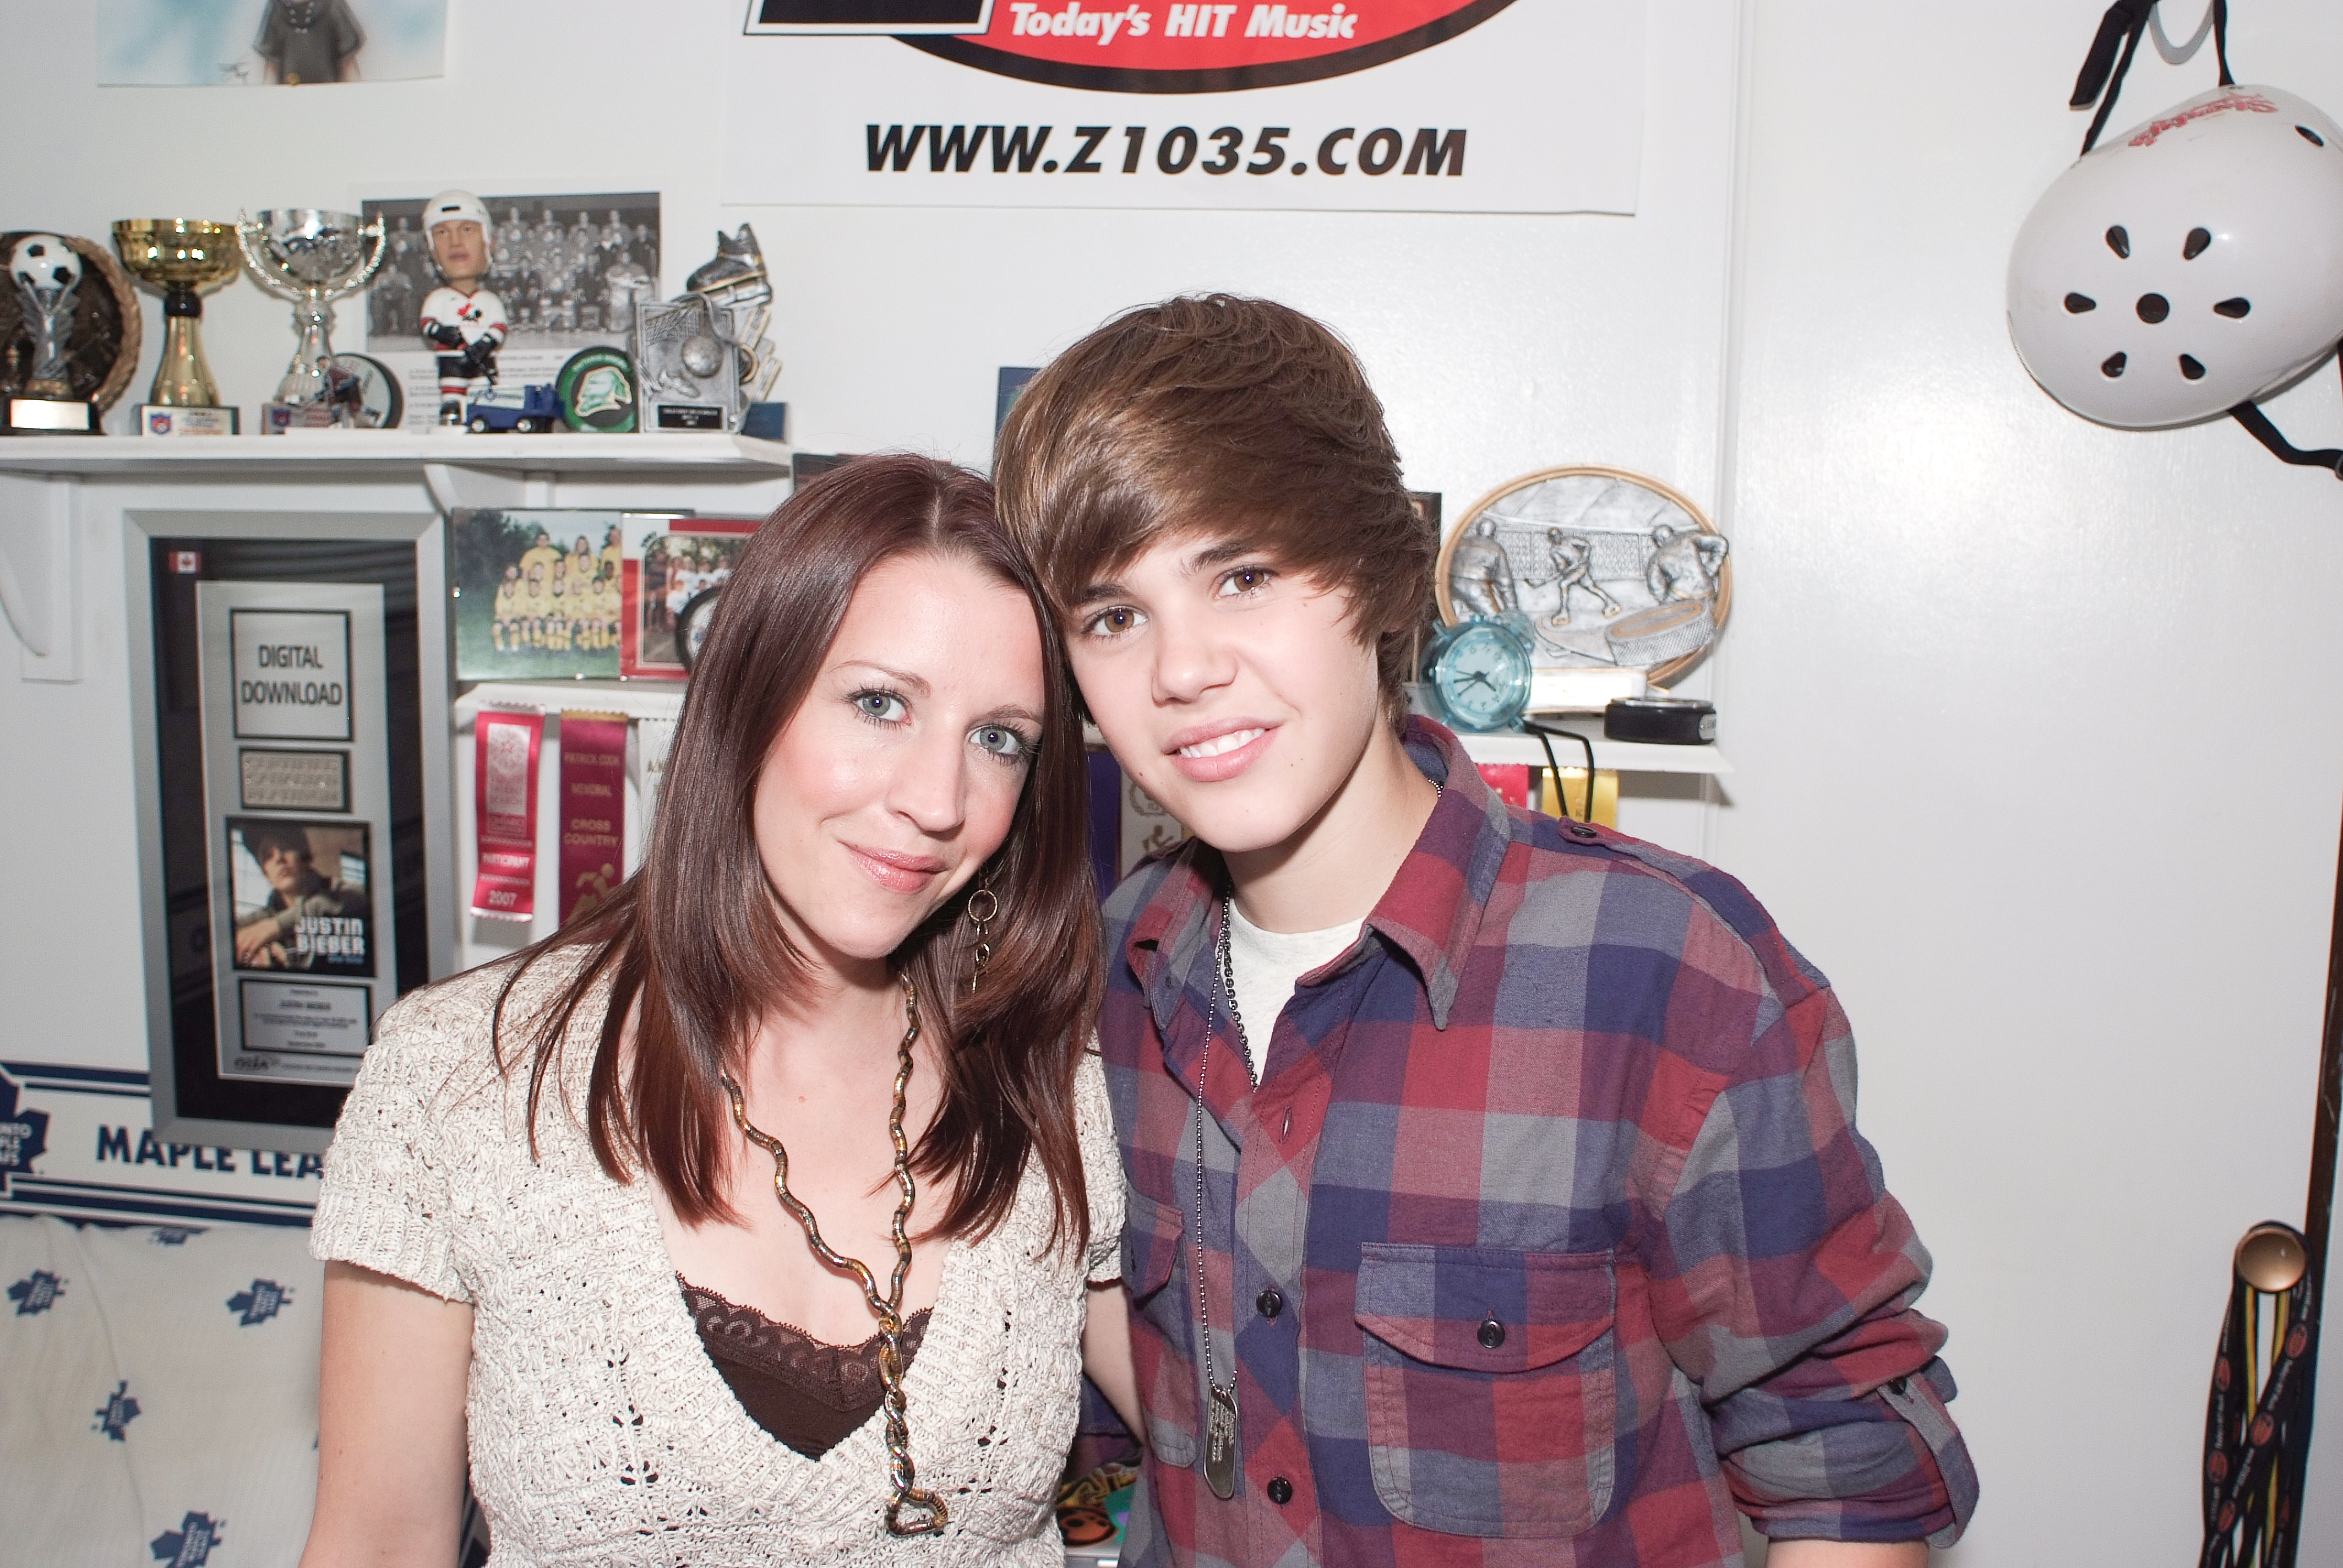 Pattie Mallet and Justin Bieber pose for a portrait at home in Stratford, Ontario, on September 29, 2009. | Source: Getty Images